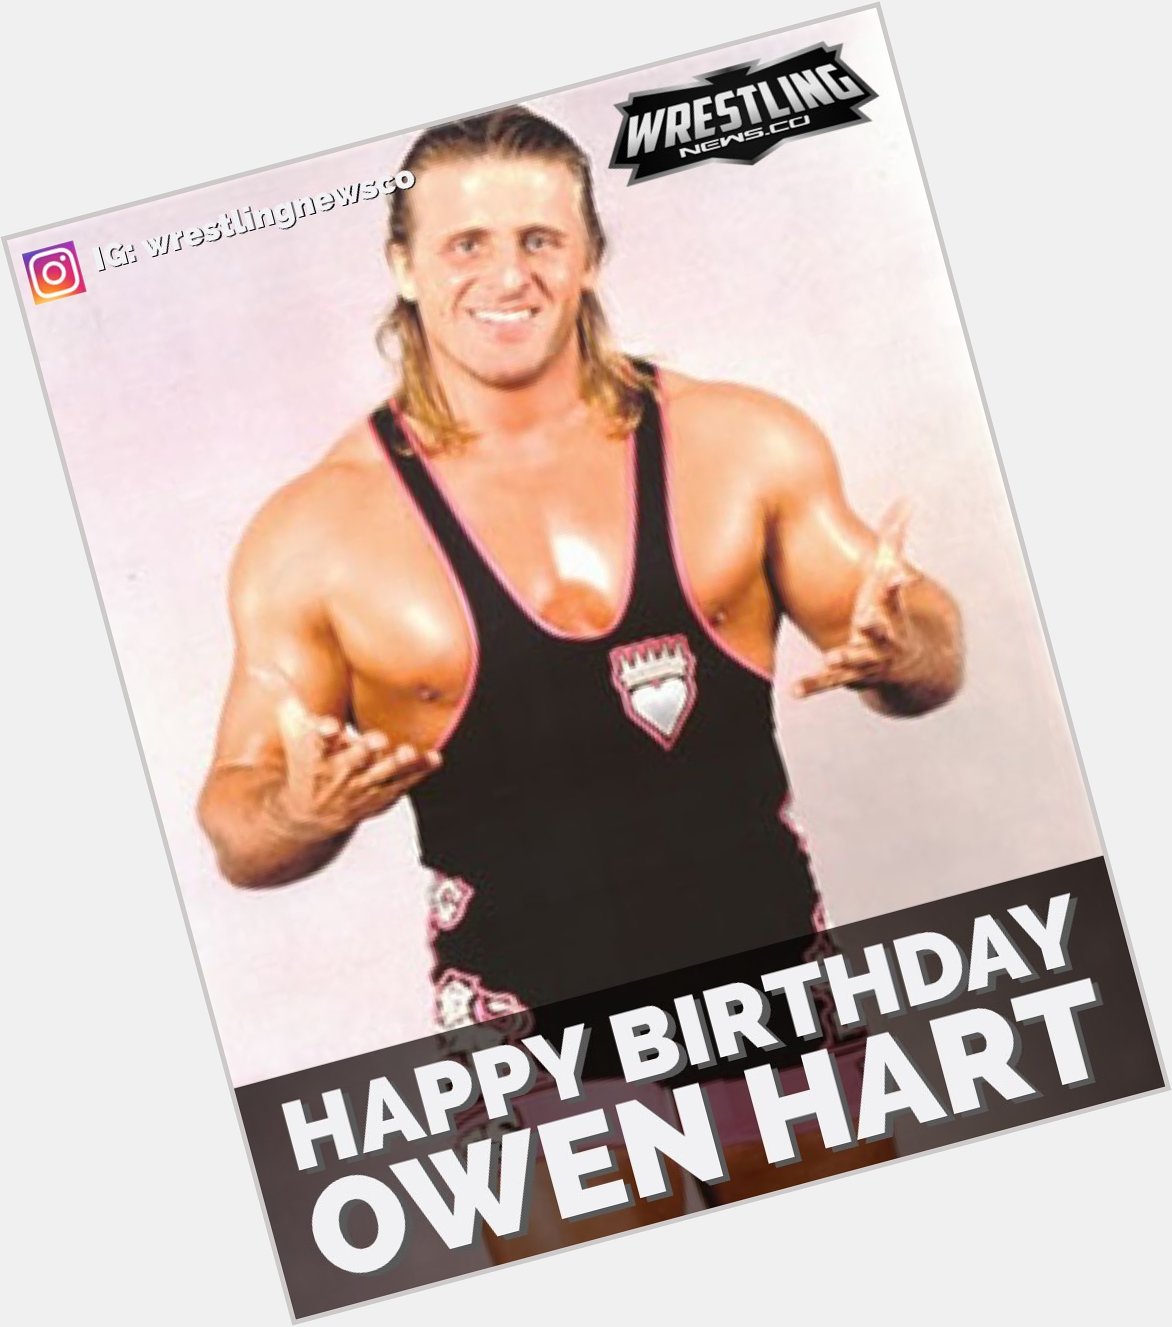 Happy birthday to the late great Owen Hart 